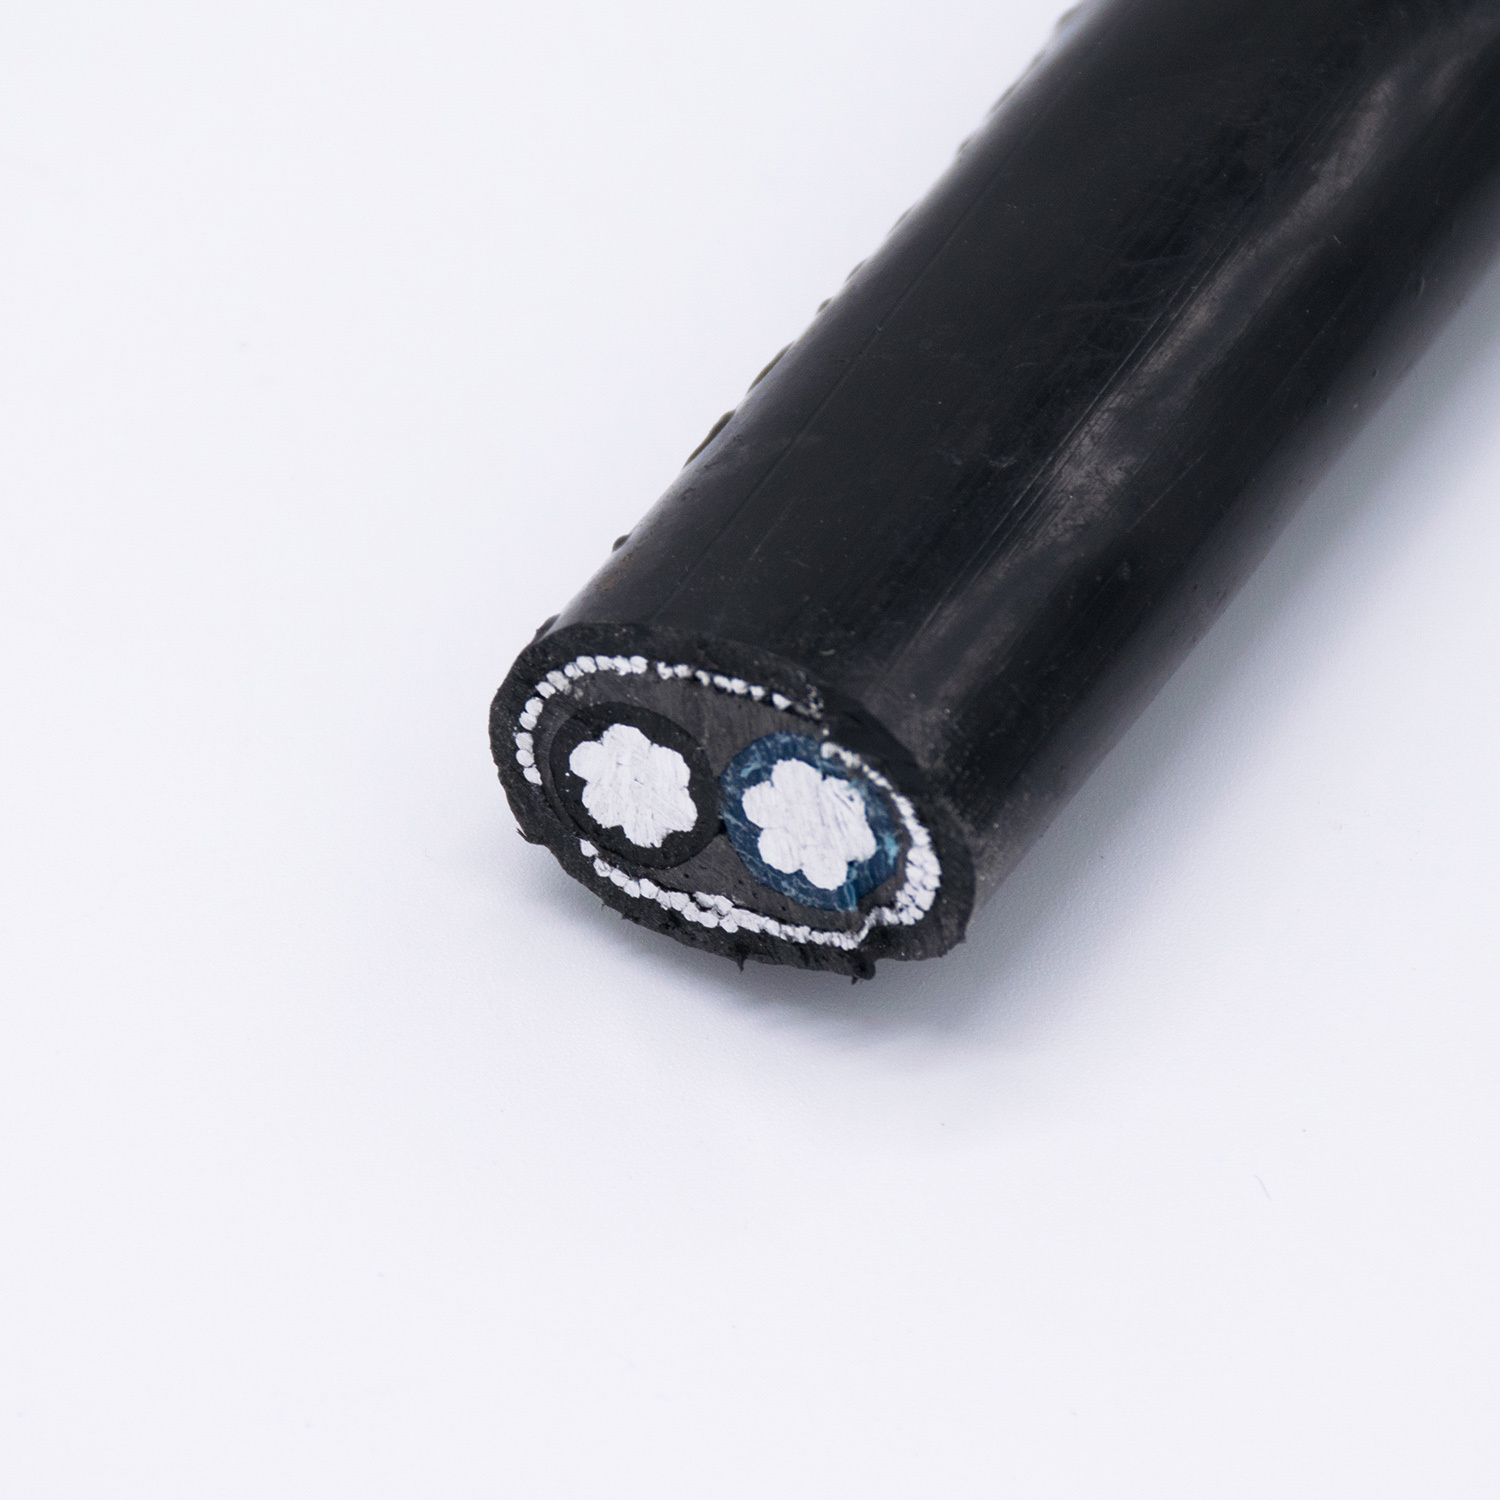 XLPE/PVC Insulated Copper /Aluminum Single Twin Core Concentric Cables Electrical Wire Cable